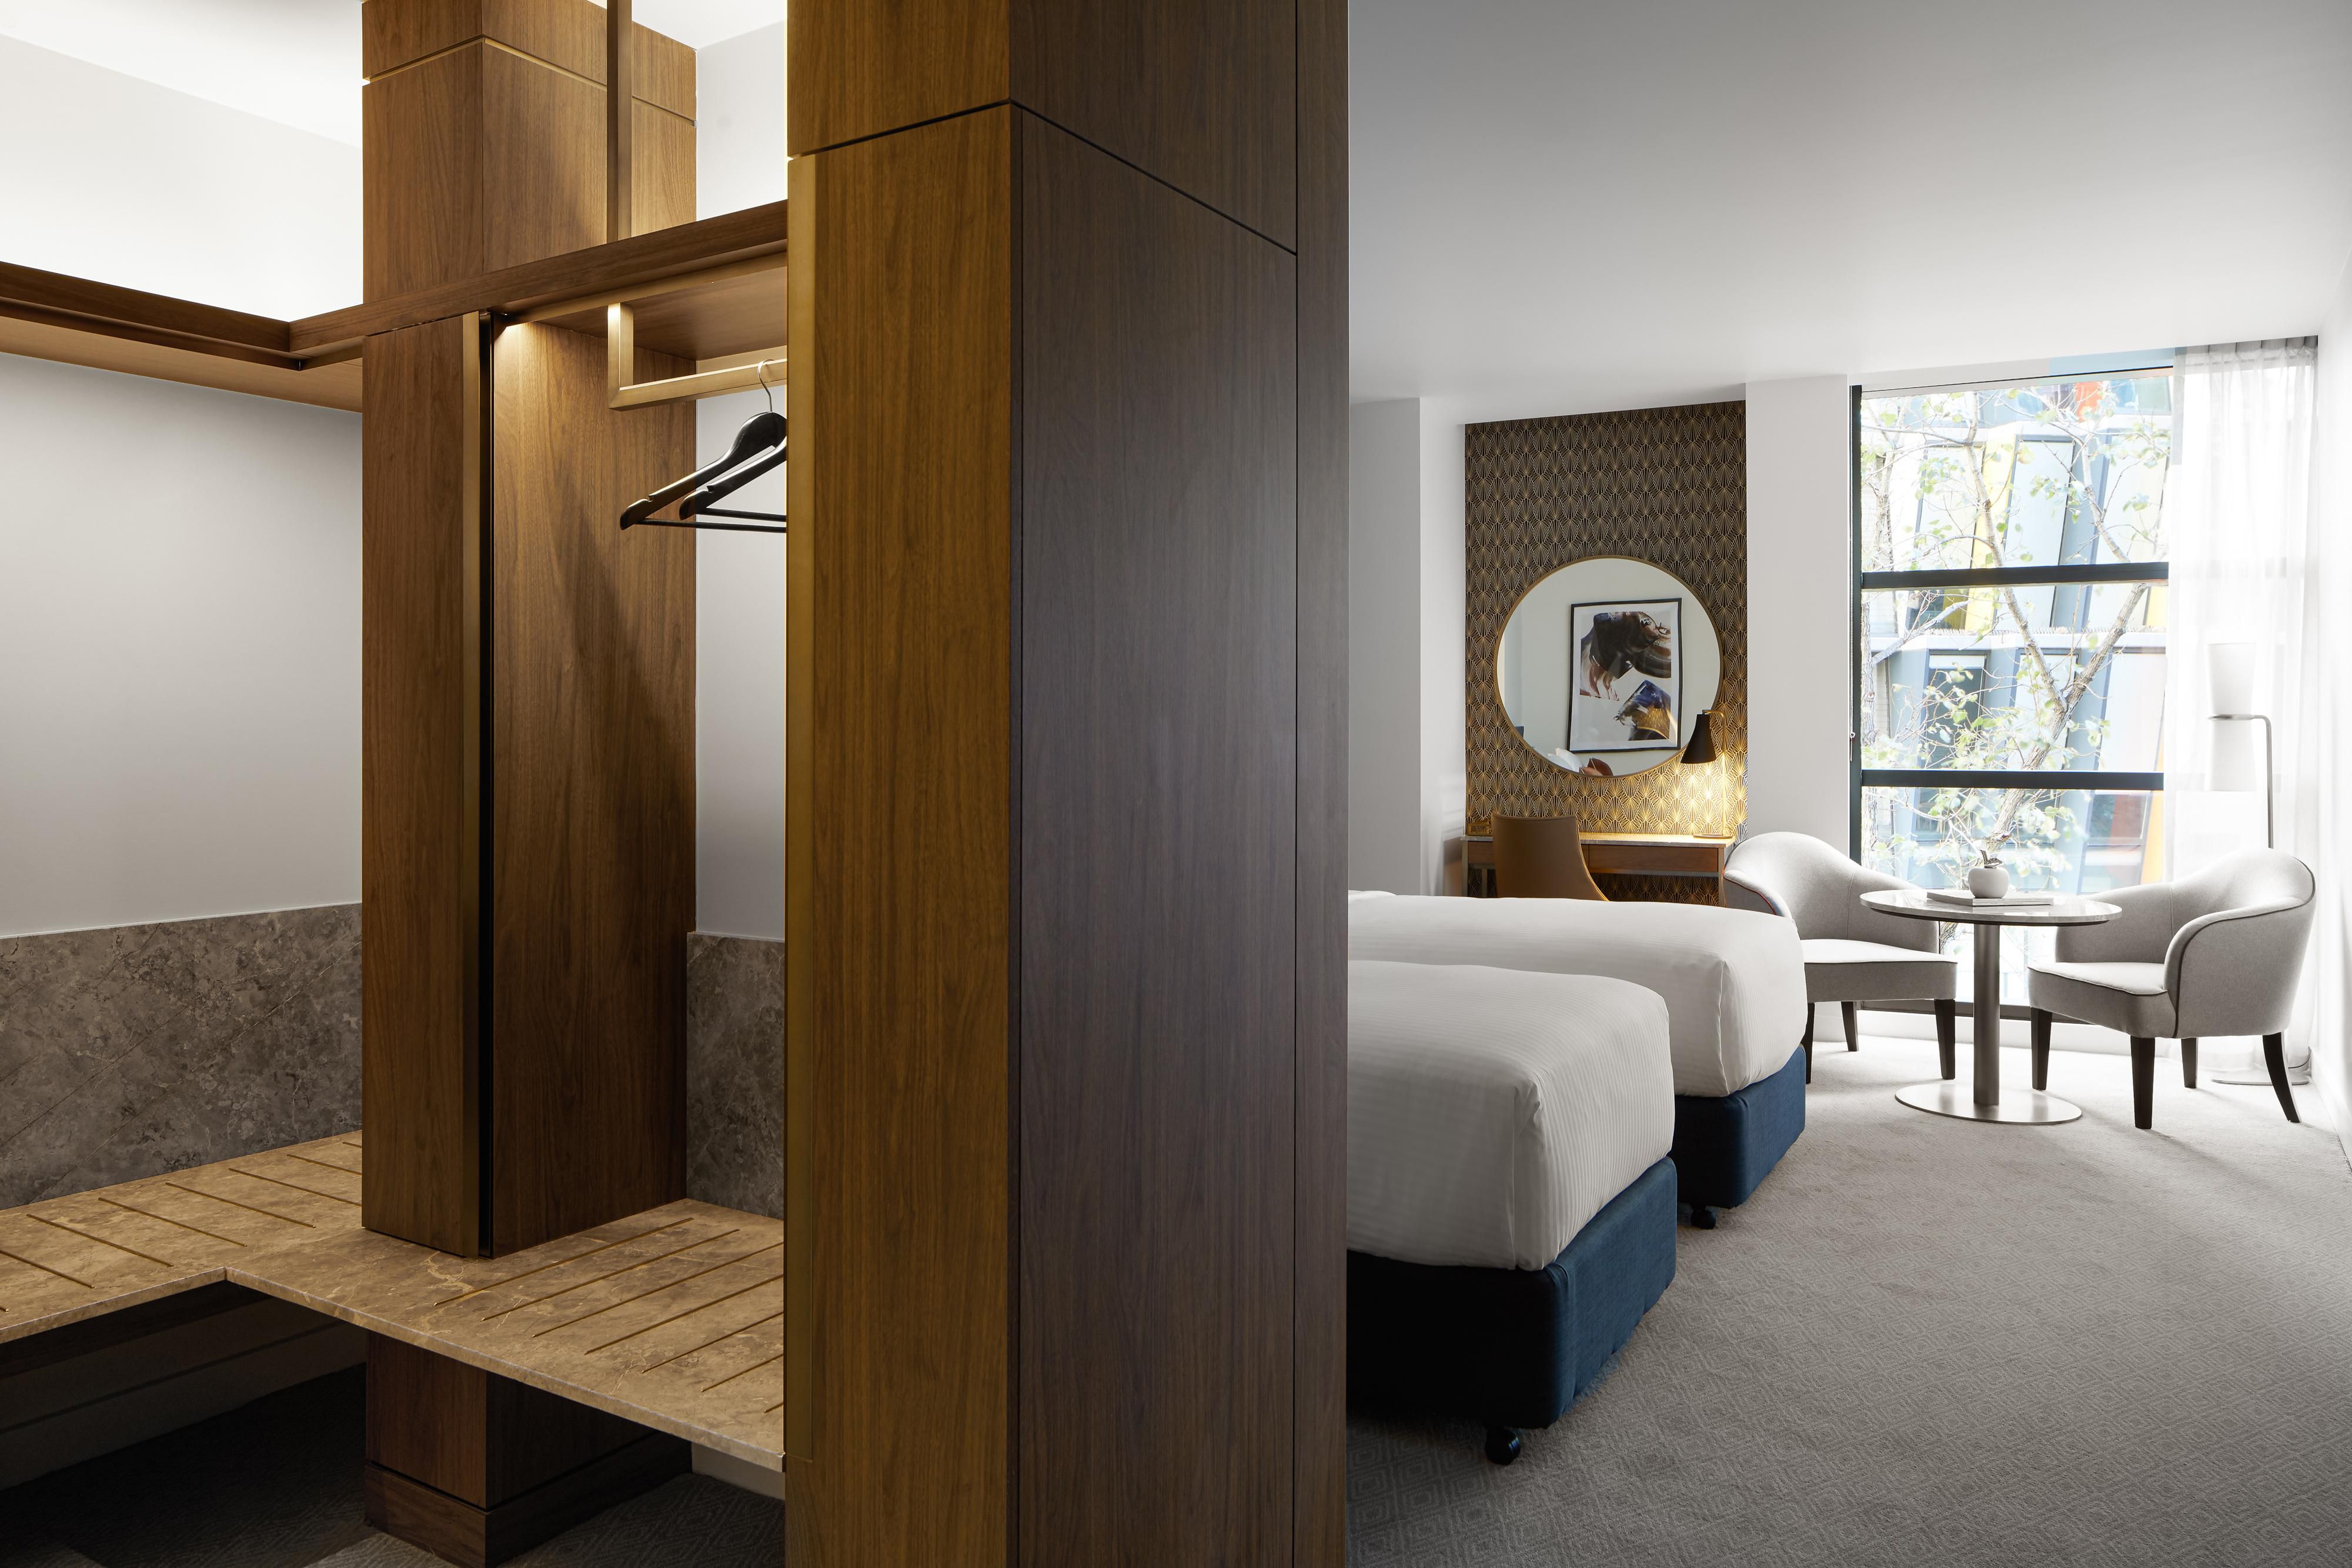 Premium rooms feature zones to unwind and ample wardrobe space